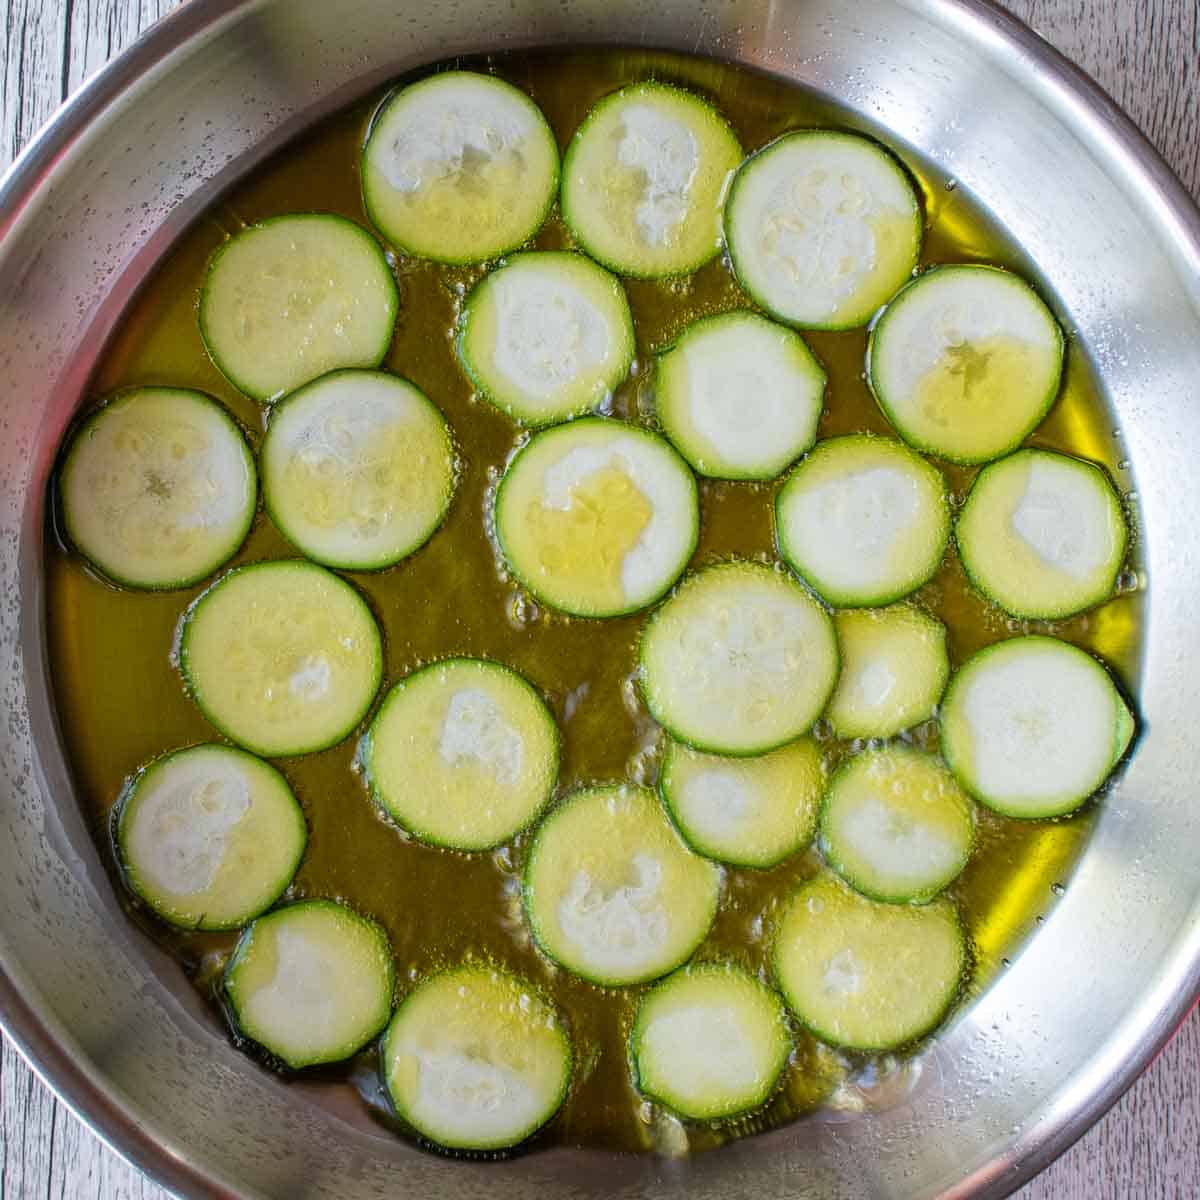 Thin rounds of zucchini frying in oil.